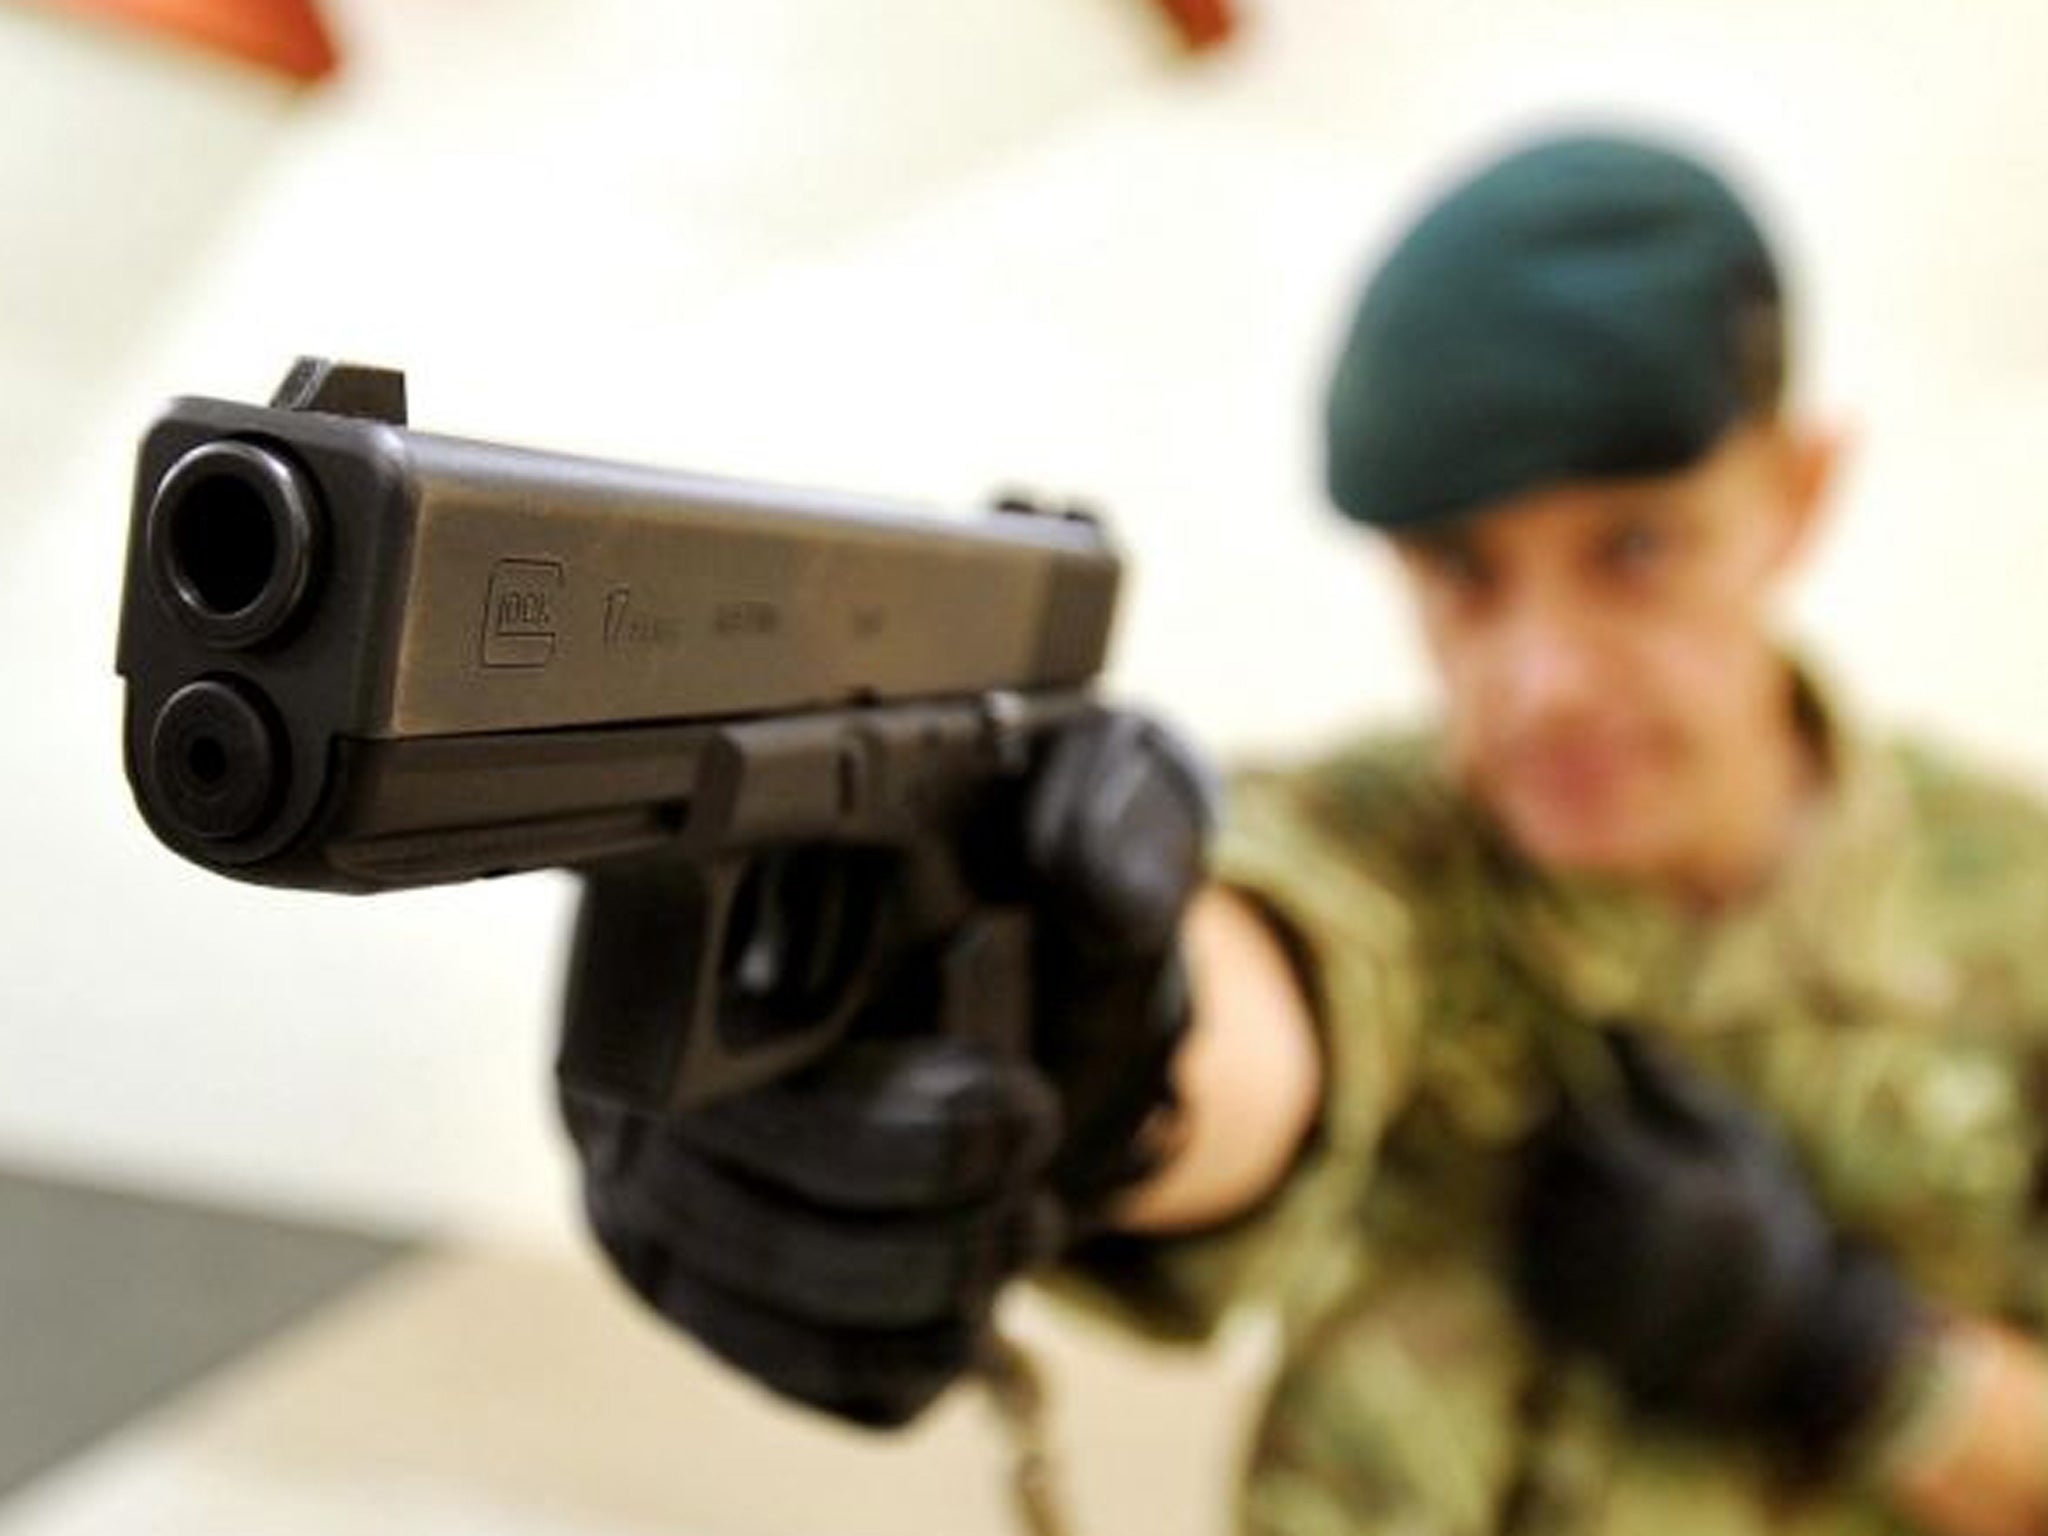 Royal Marine Sergeant Steve Lord tests a Glock 17 9mm pistol, on an indoor shooting range at Woolwich Barracks, south-east London, as personnel from all three services are to start using the new Glock pistols after a contract was awarded to replace the cu